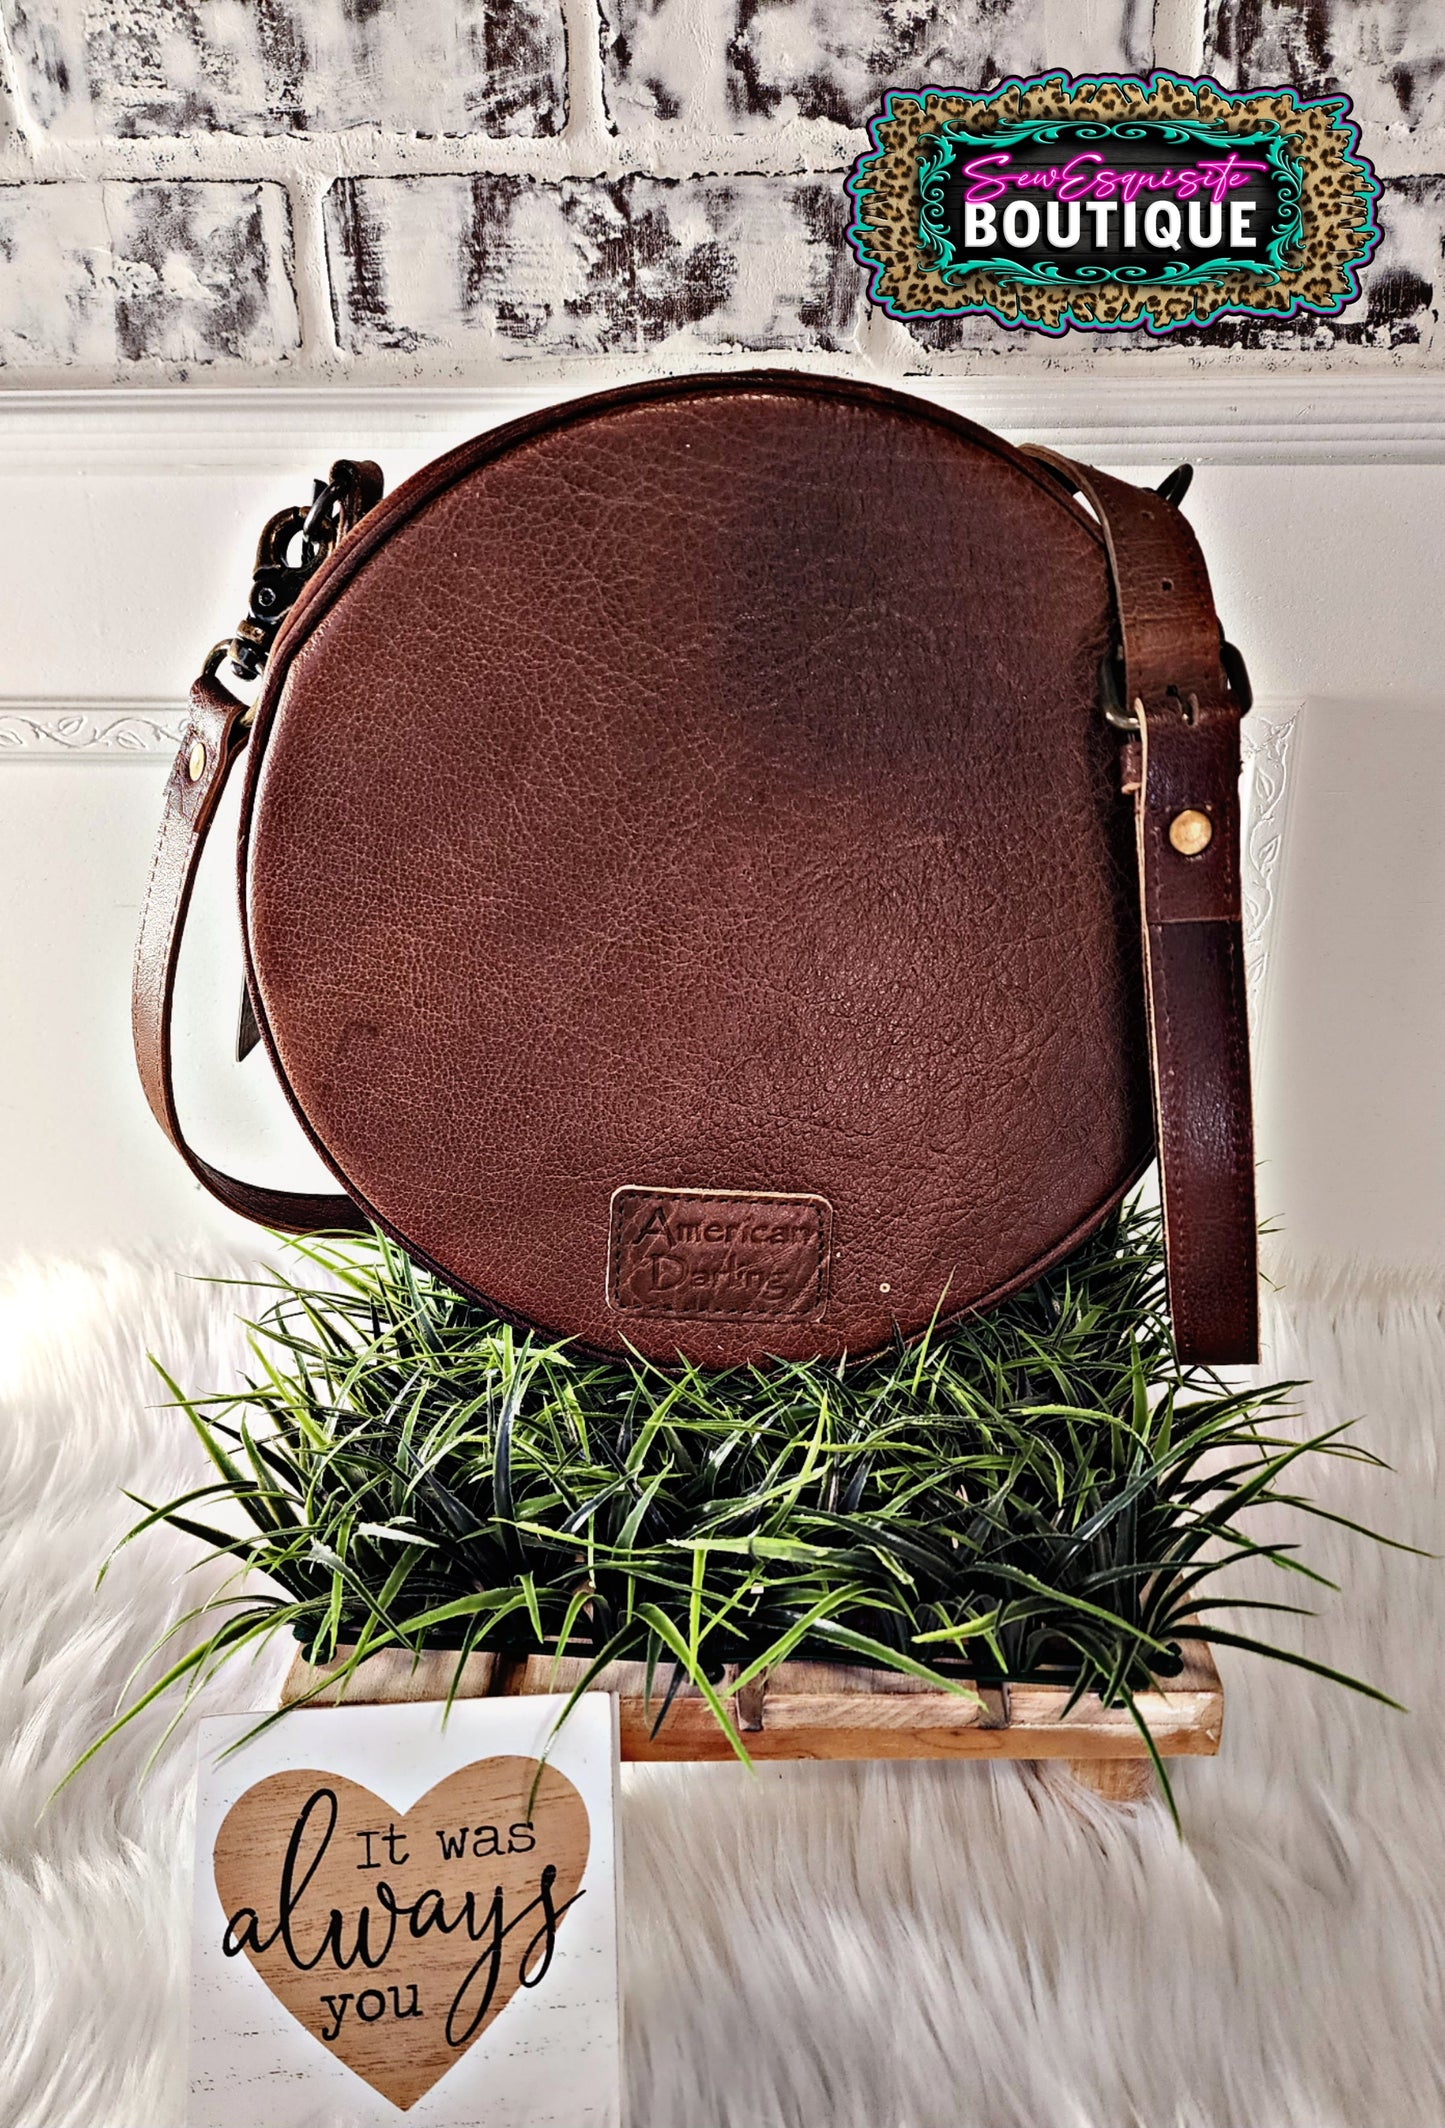 American Darling Round Leather Bag